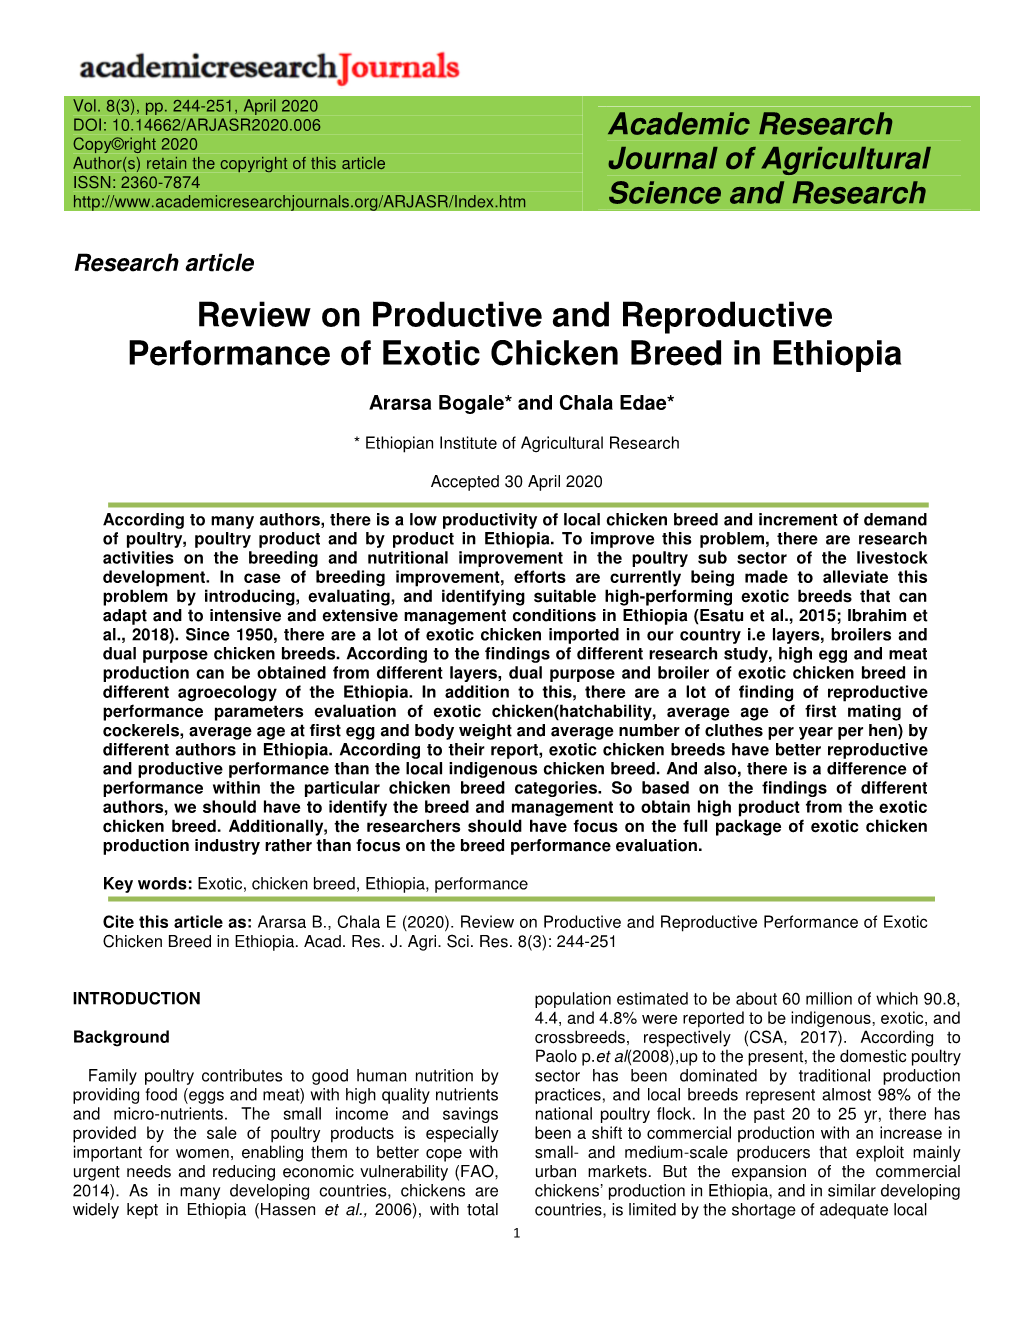 Review on Productive and Reproductive Performance of Exotic Chicken Breed in Ethiopia